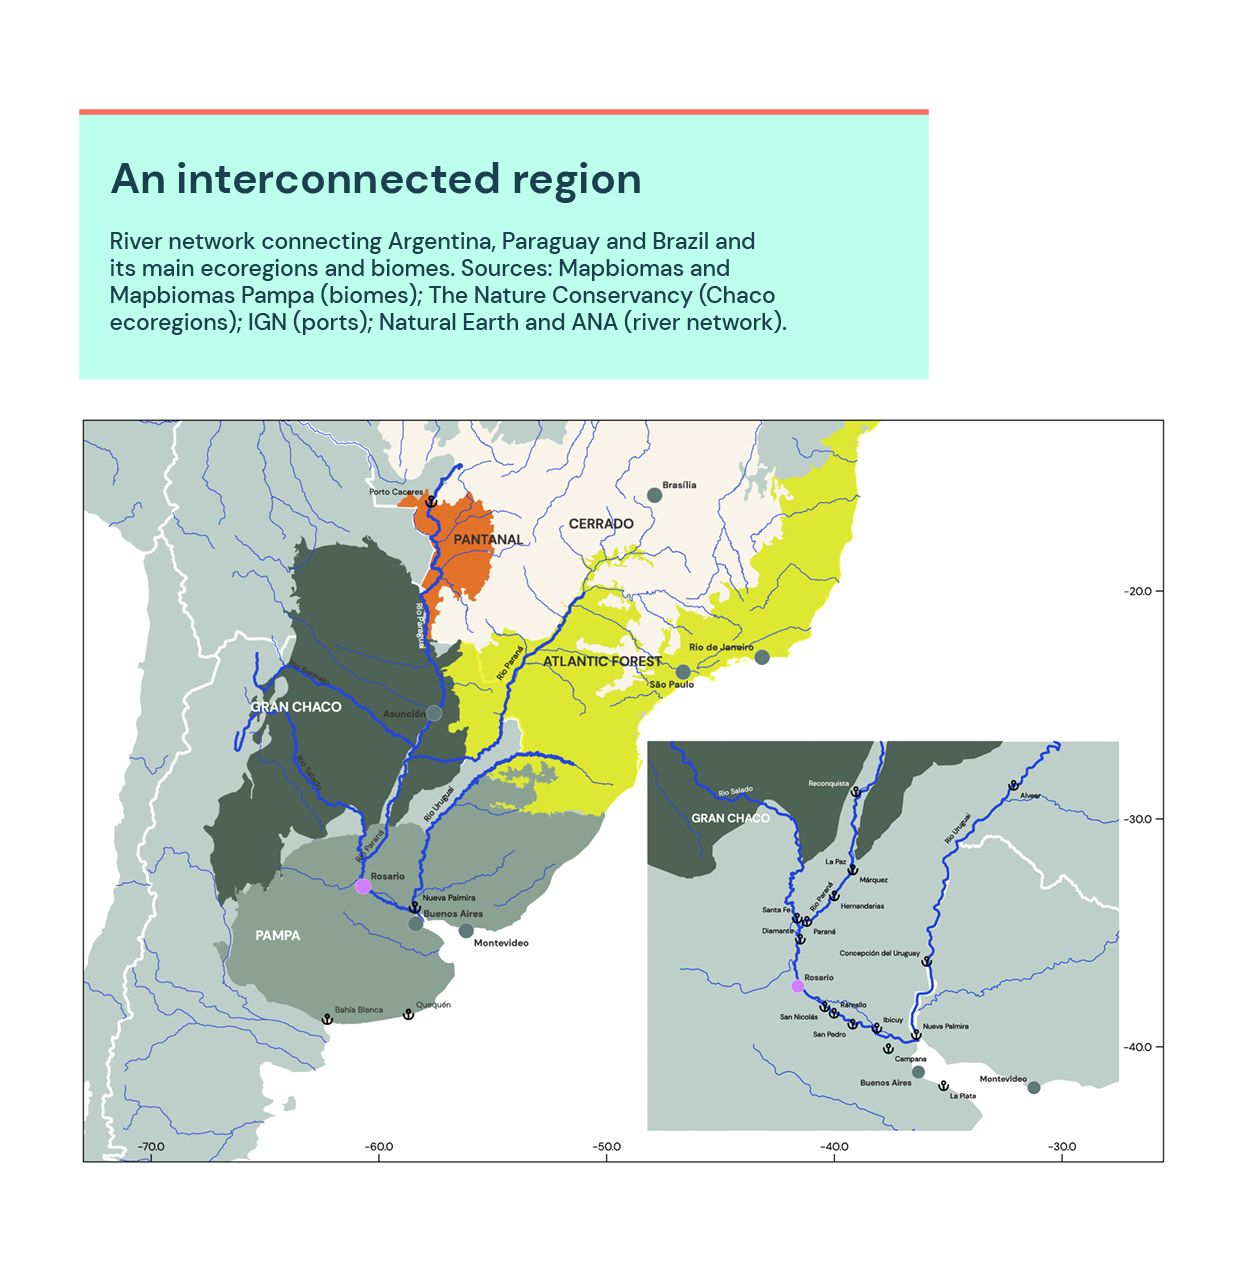 River network connecting Argentina, Paraguay and Brazil and its main ecoregions and biomes